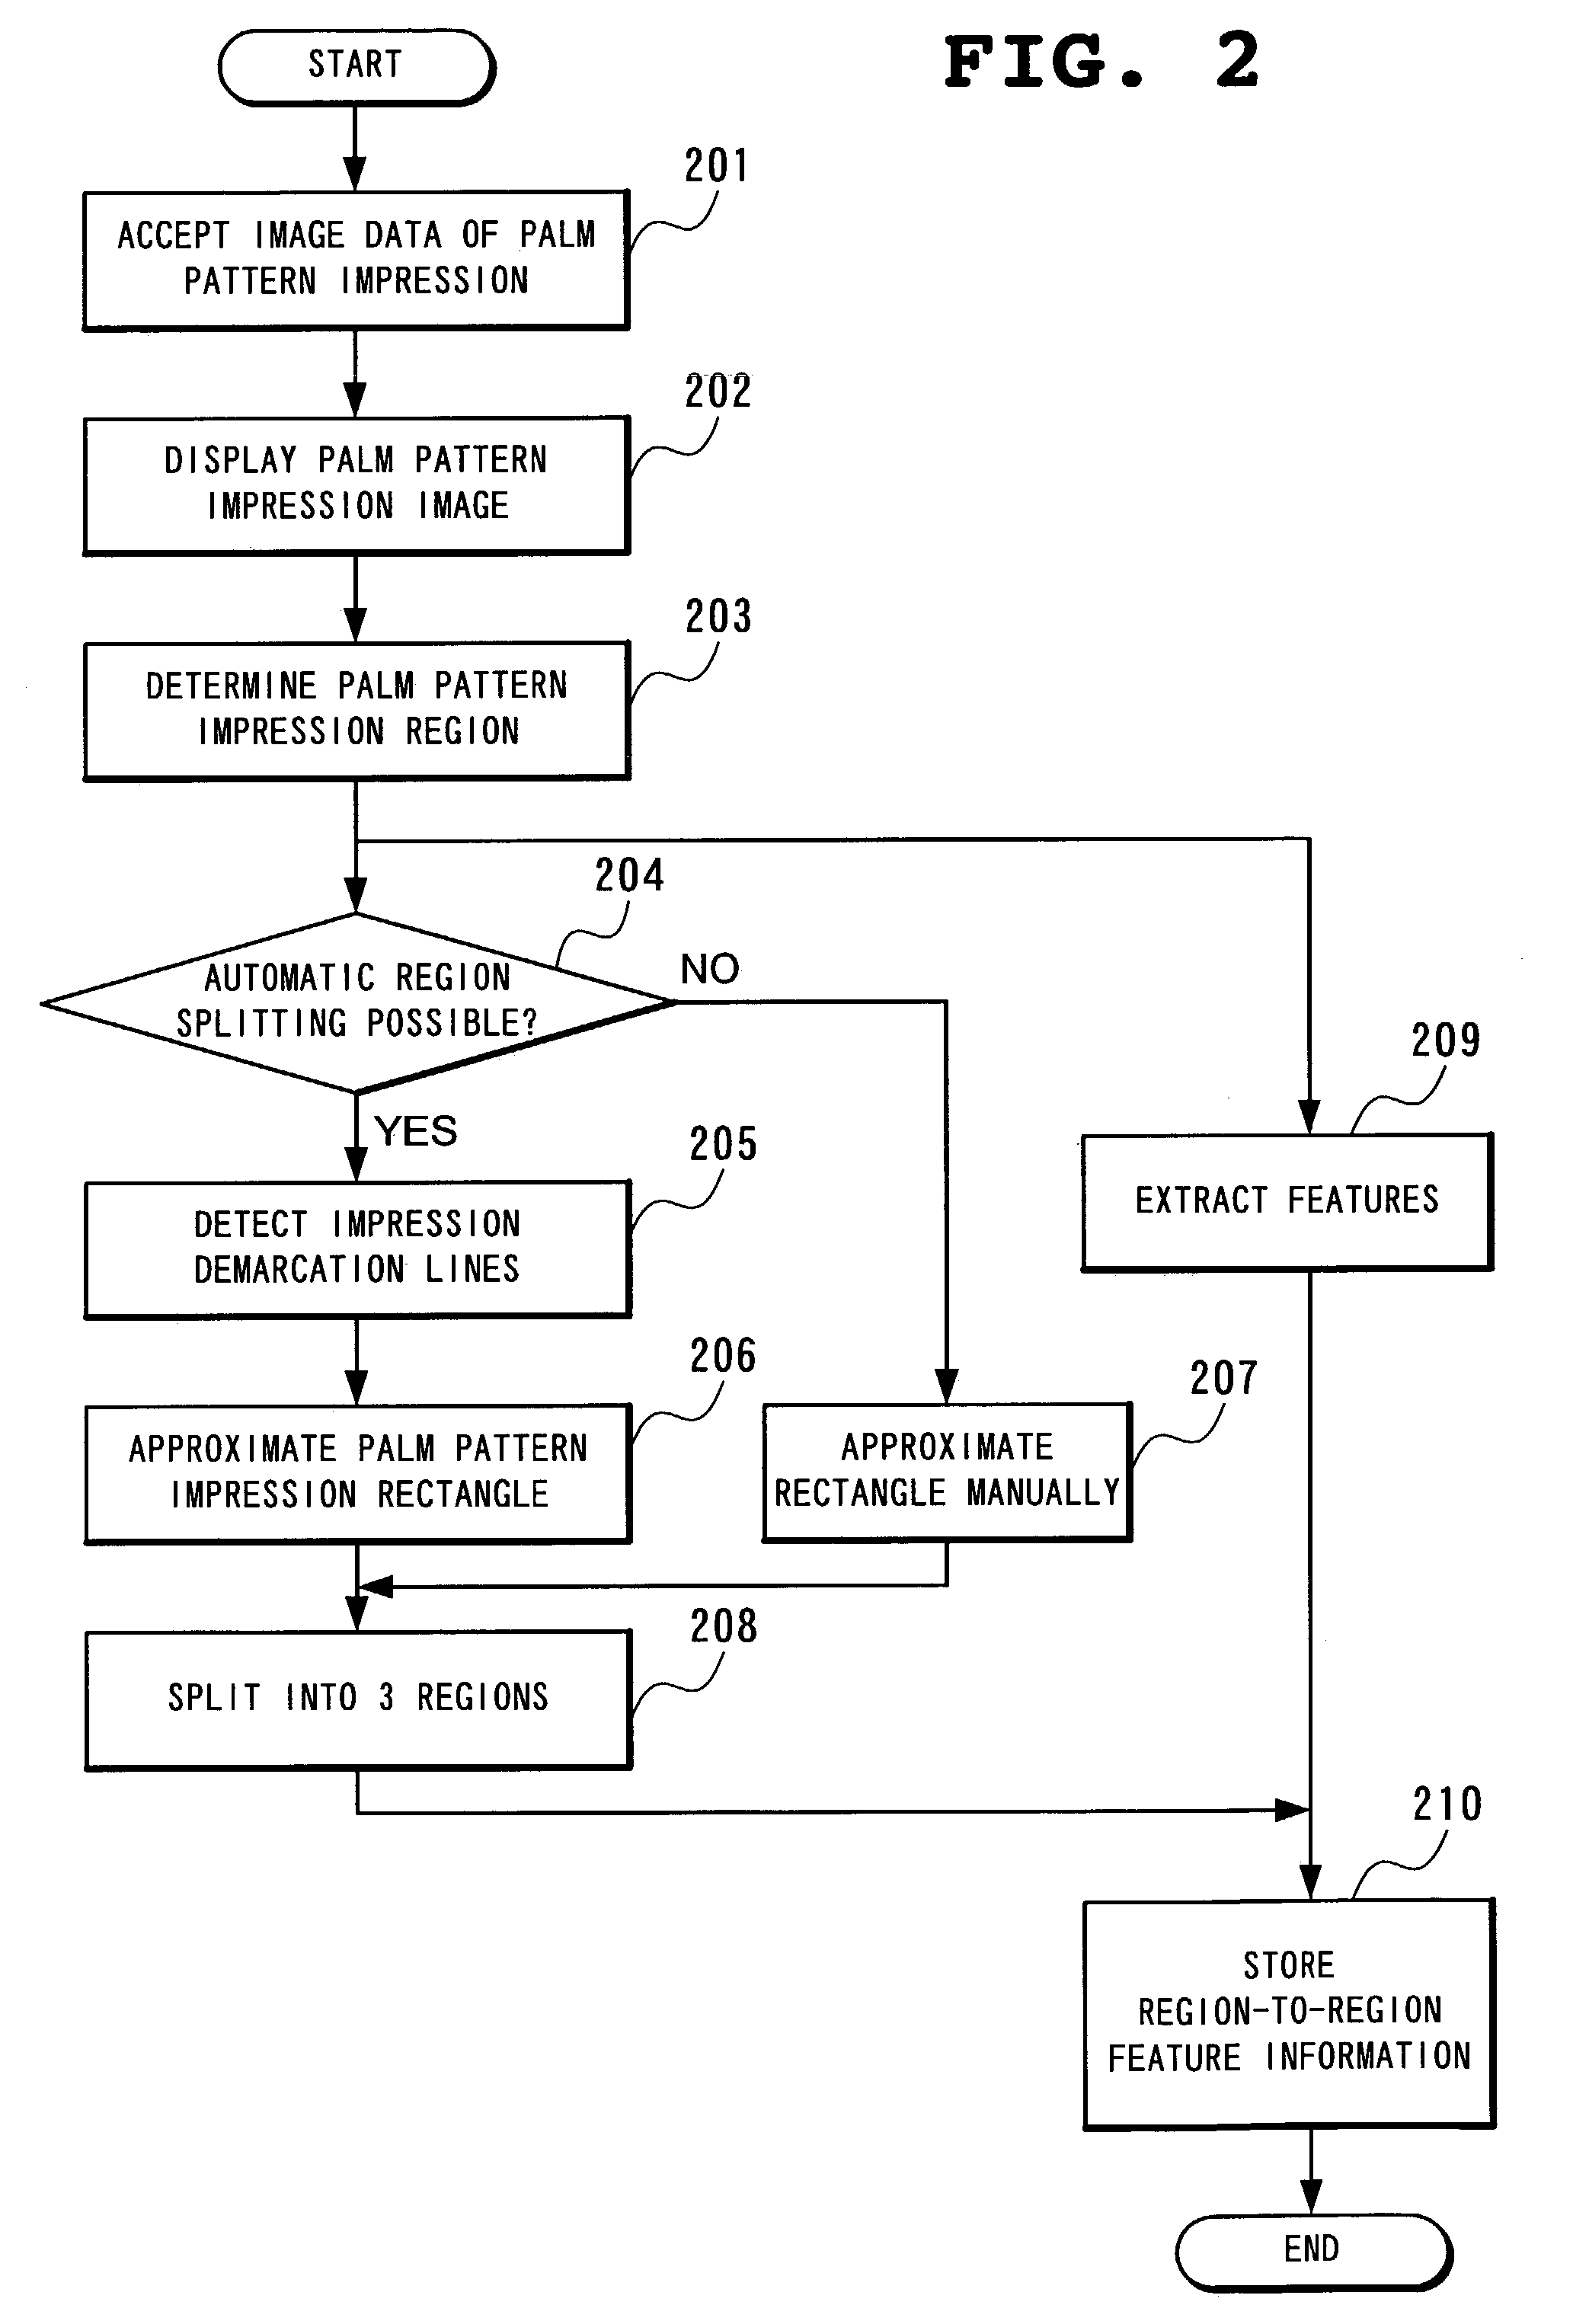 Method and apparatus for registering palm pattern impression